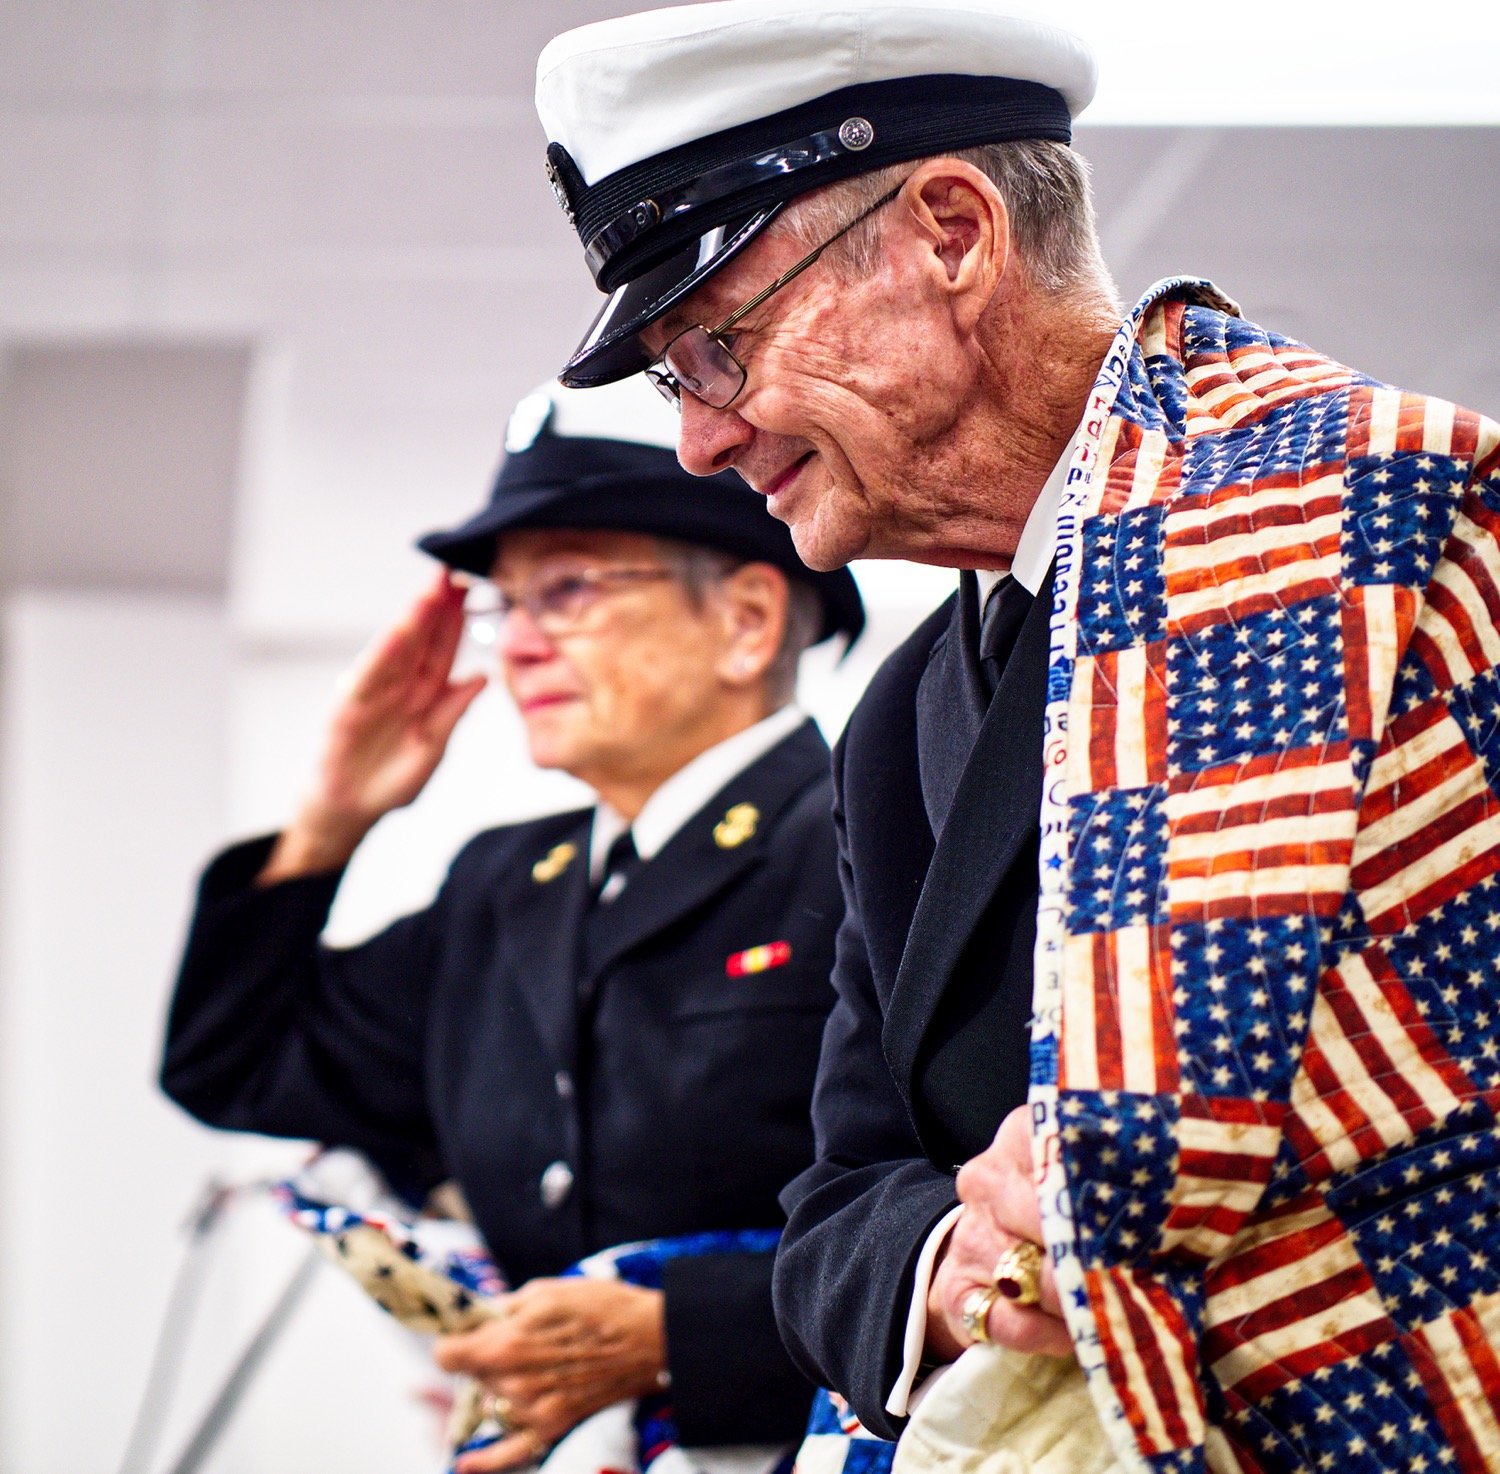 Barbara Melott salutes as Doc Melott grasps his newly-received quilt. The couple, both navy veterans of Vietnam, were touched and grateful for the gesture of support given to them Friday at the Quilts of Valor ceremony in Quitman. [view more veteran appreciation]